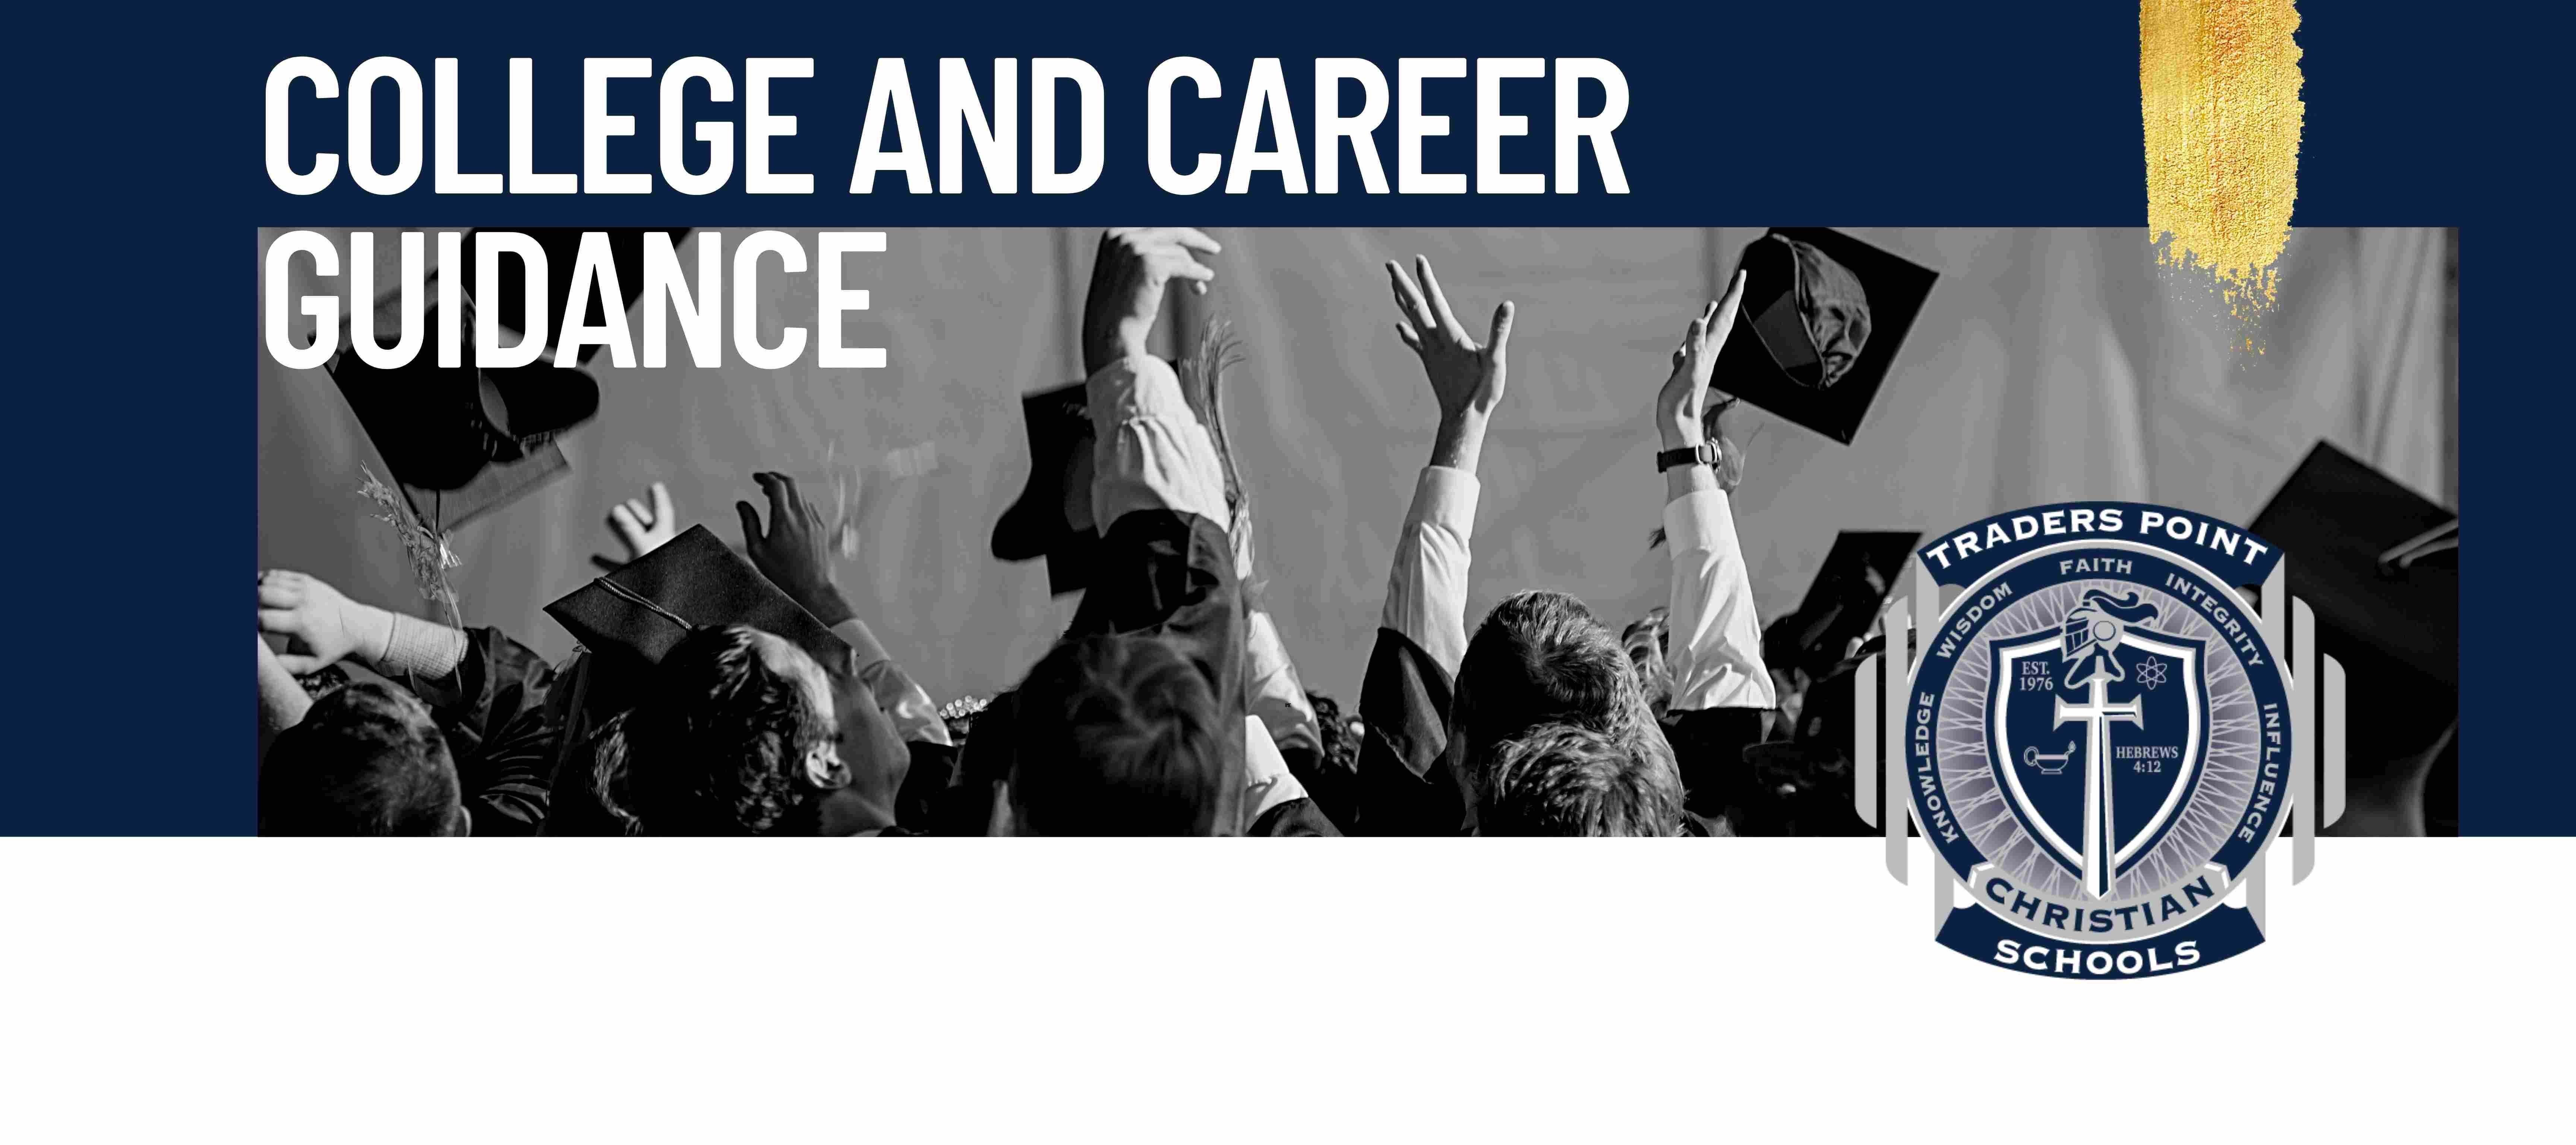 college and career guidance (72 × 32 in)